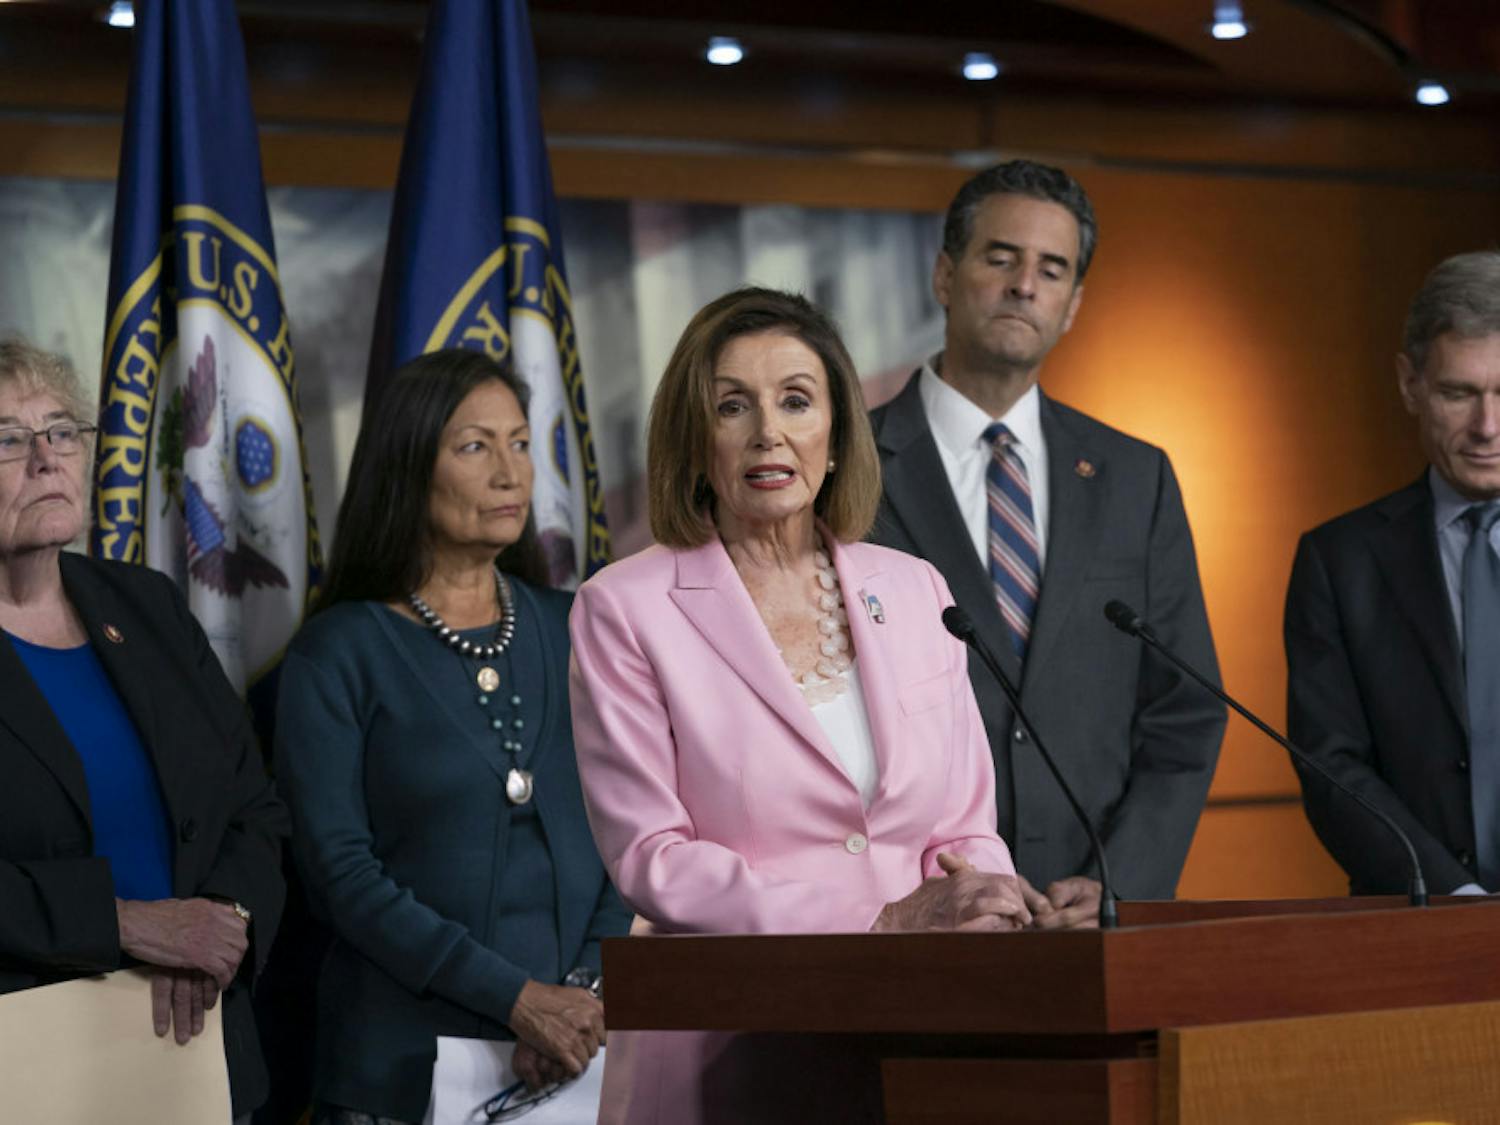 Speaker of the House Nancy Pelosi, D-Calif., leads other House Democrats to discuss H.R. 1, The For the People Act, which passed in the House but is being held up in the Senate, at the Capitol in Washington, Friday, Sept. 27, 2019. From left are, Rep. Zoe Lofgren, D-Calif., a member of the House Judiciary Committee, Rep. Deb Haaland, D-N.M., Rep. John Sarbanes, D-Md., and Rep. Tom Malinowski, D-N.J. (AP Photo/J. Scott Applewhite)